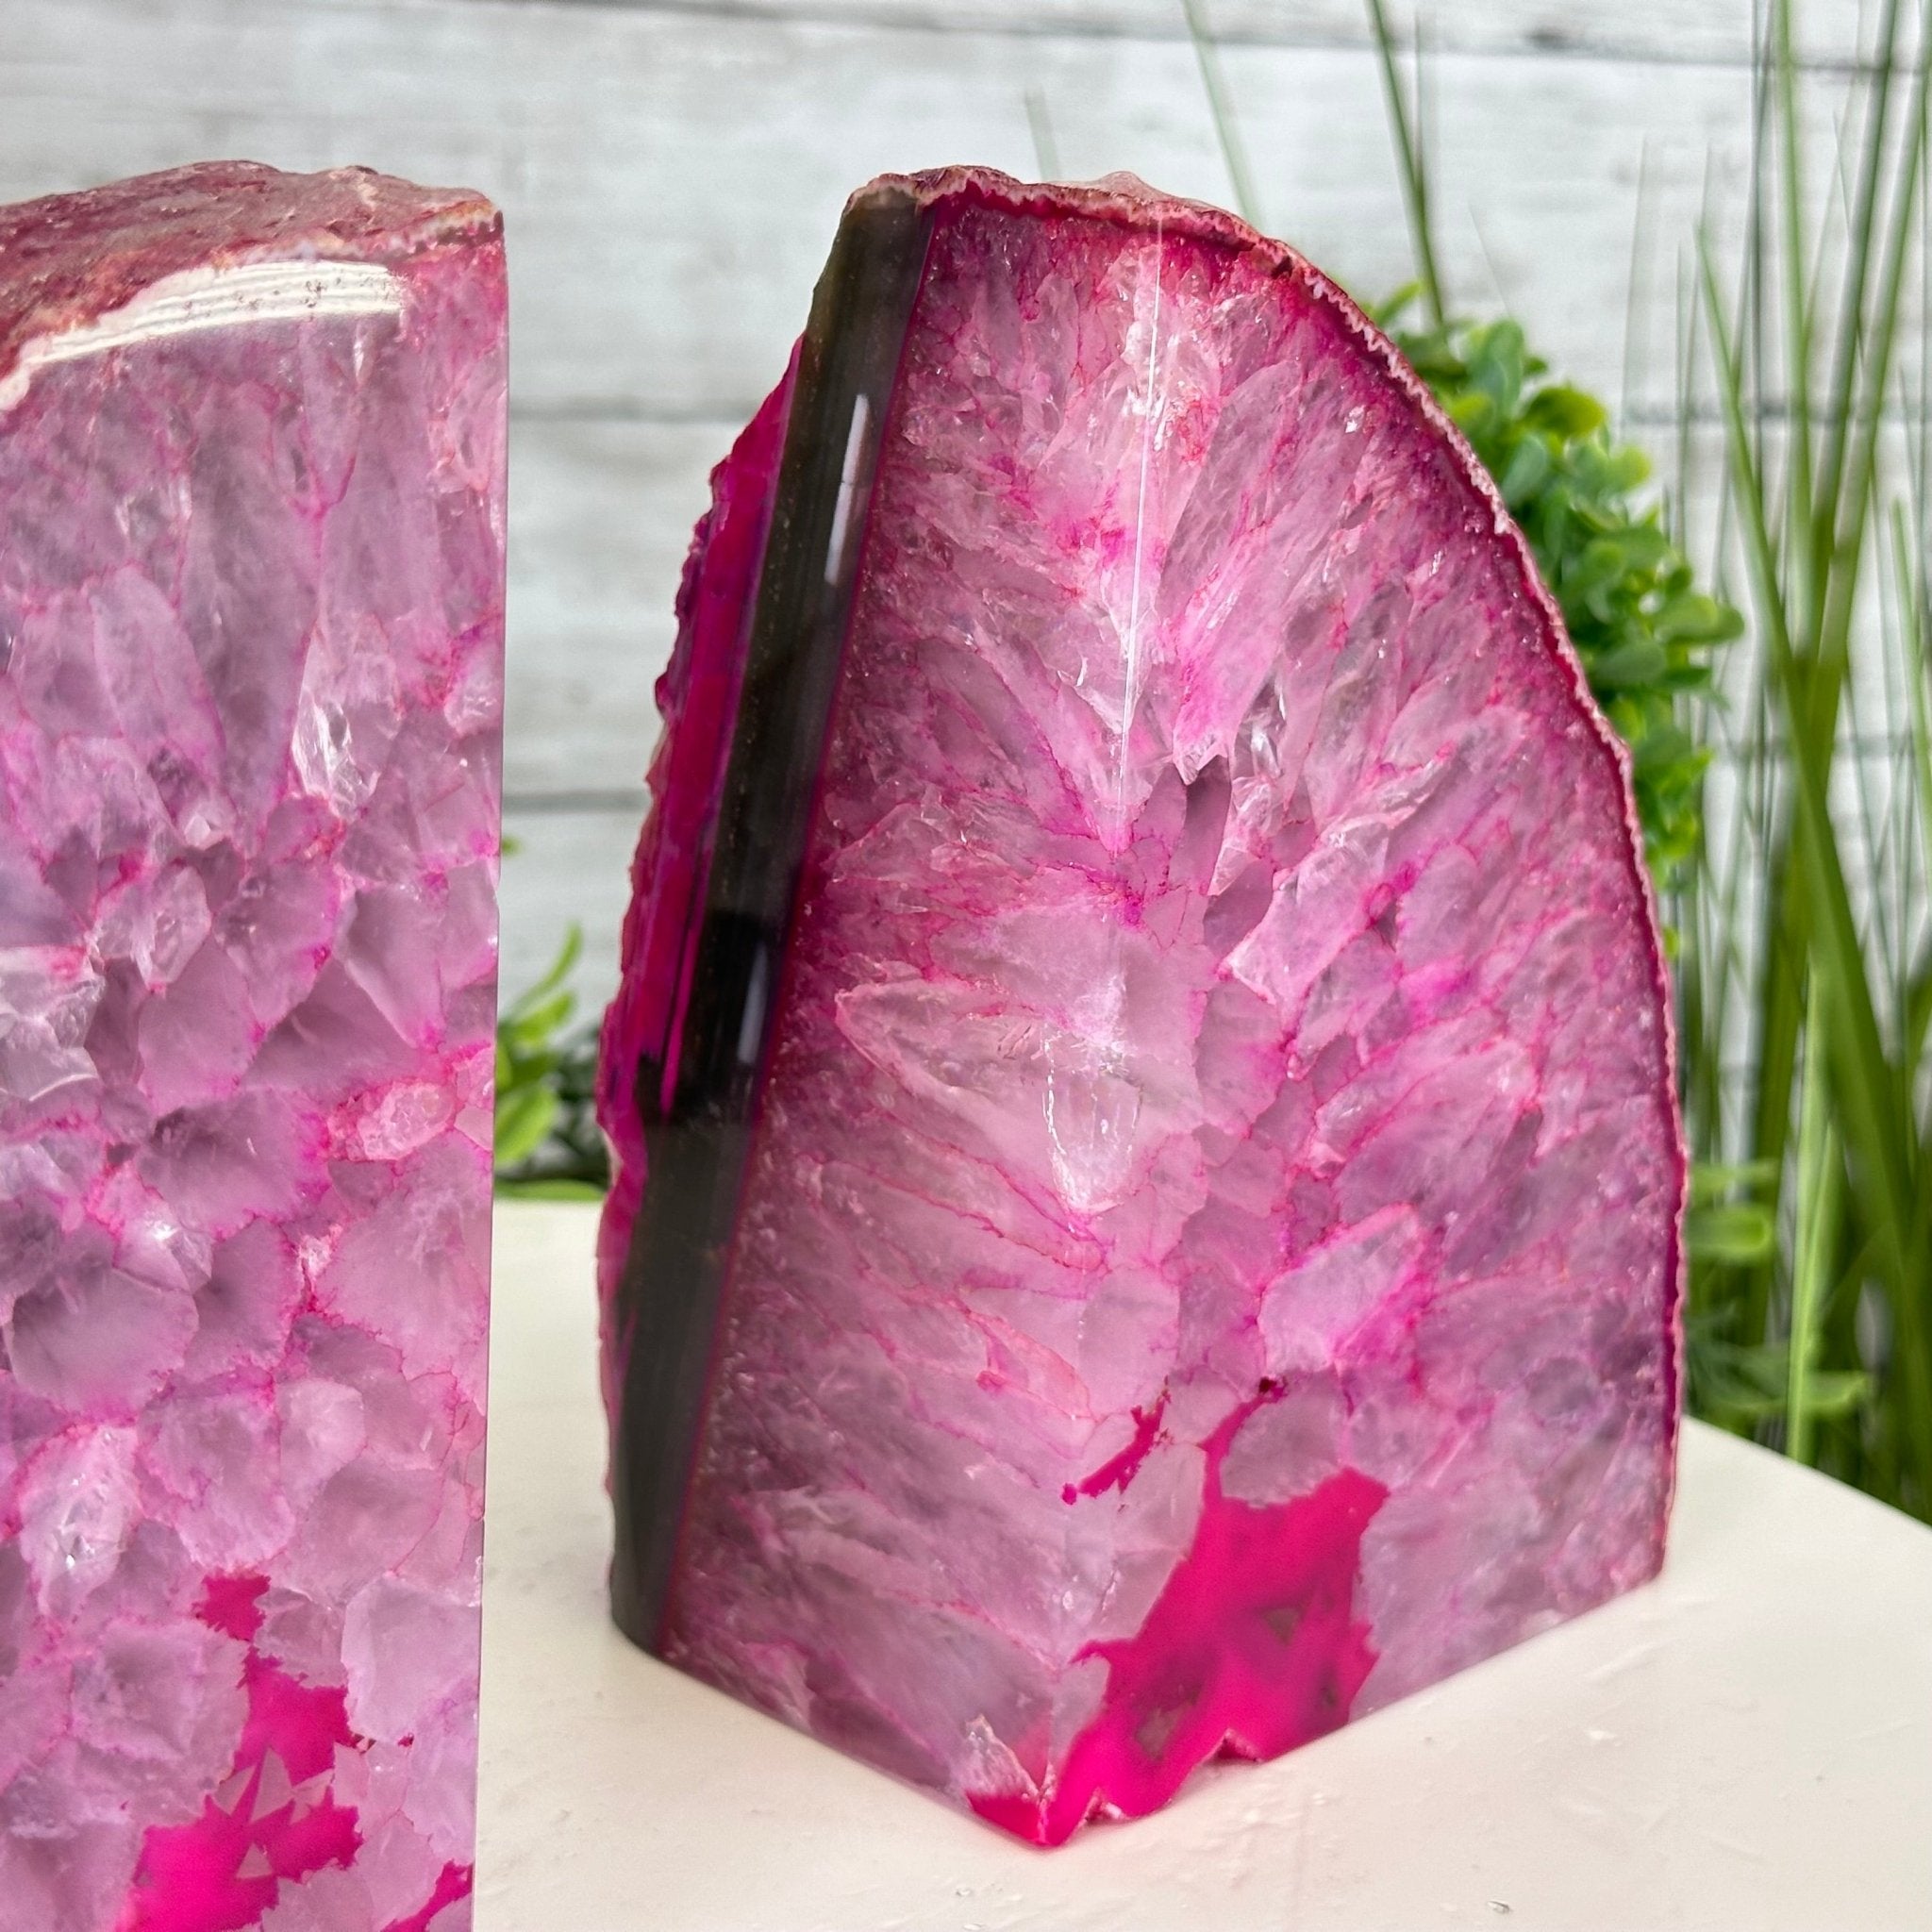 Pink Dyed Brazilian Agate Stone Bookends, 9.5 lbs & 6" tall #5151PA-025 - Brazil GemsBrazil GemsPink Dyed Brazilian Agate Stone Bookends, 9.5 lbs & 6" tall #5151PA-025Bookends5151PA-025